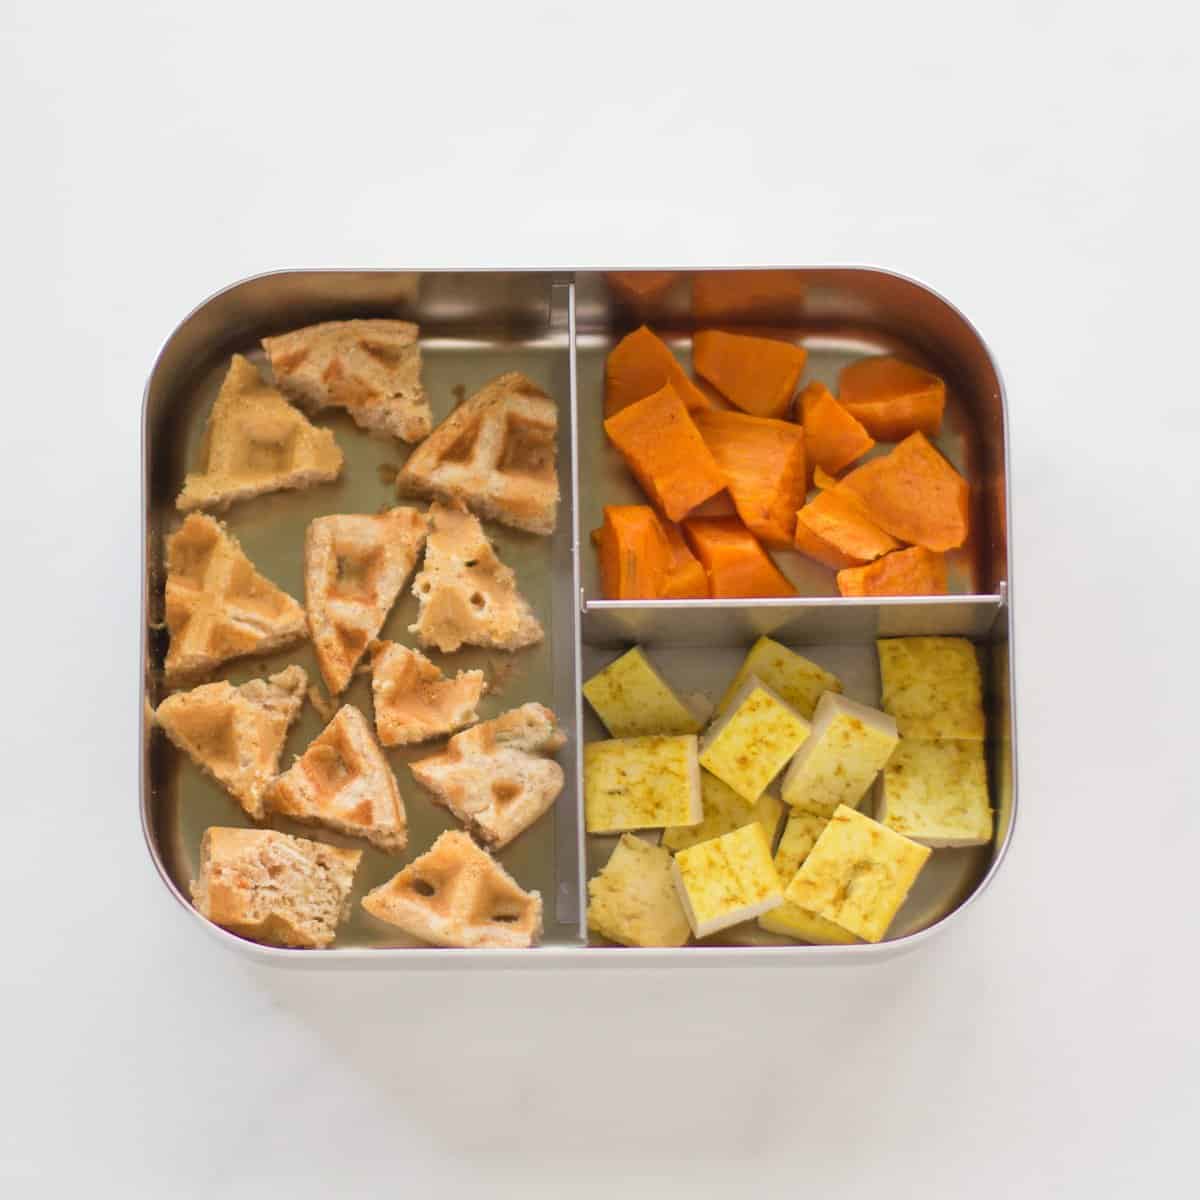 waffles, carrots, and tofu cut into bite-sized pieces in a stainless steel bento box.